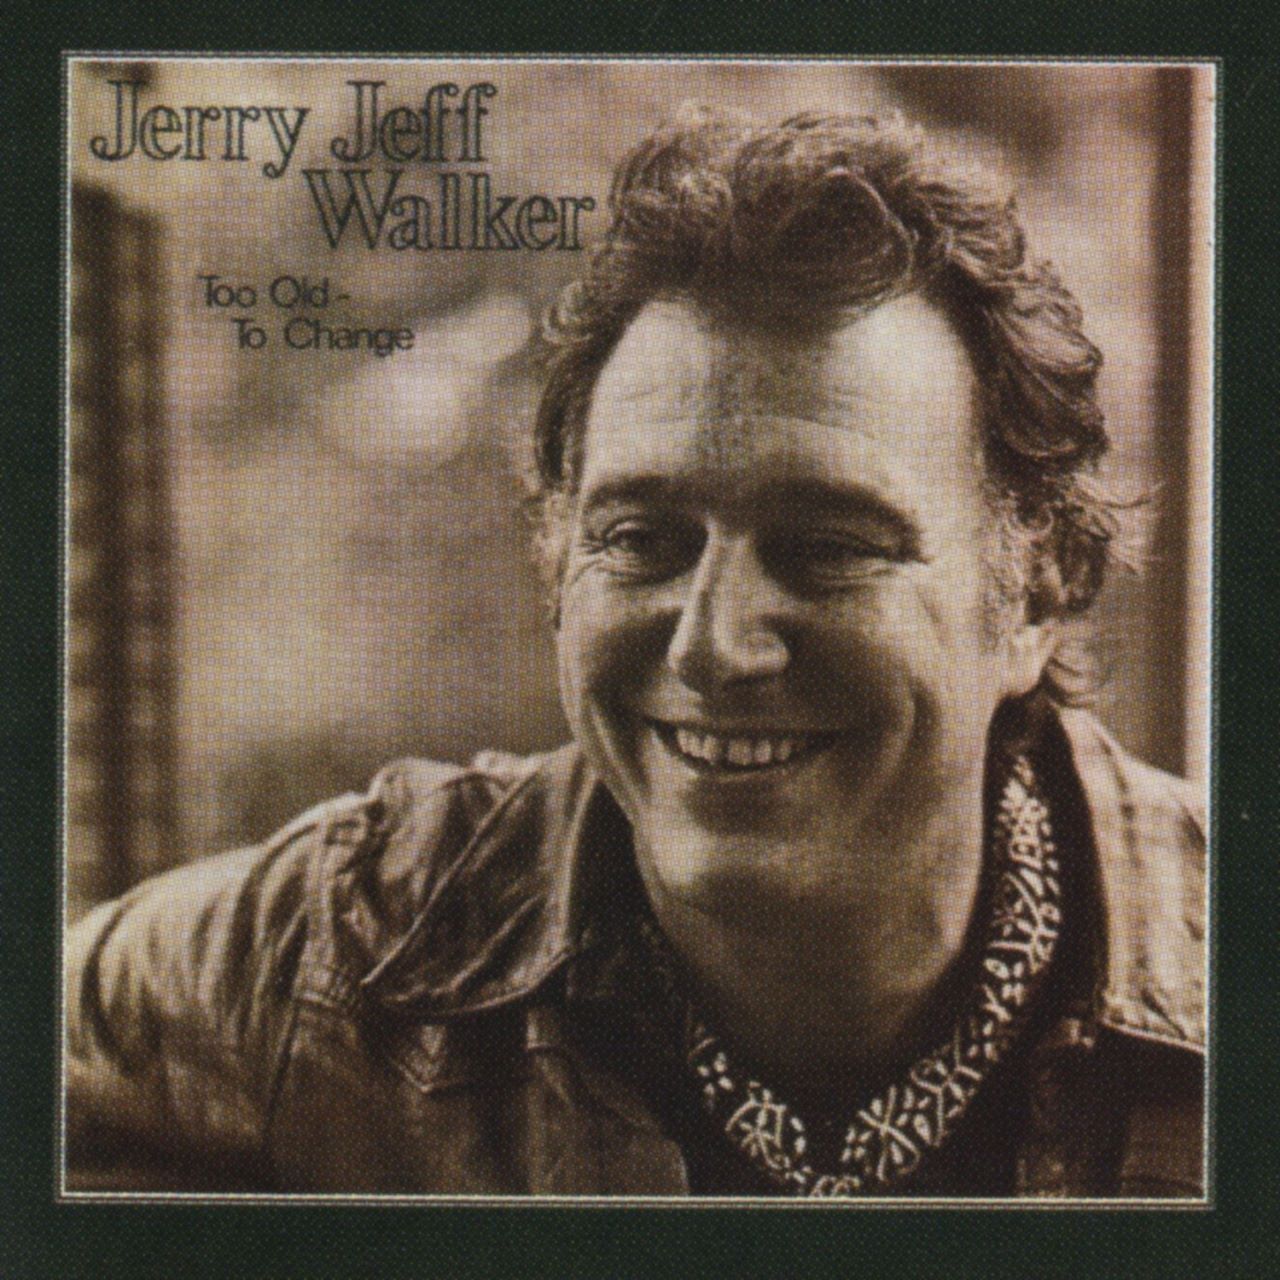 Jerry Jeff Walker - Too Old To Change cover album